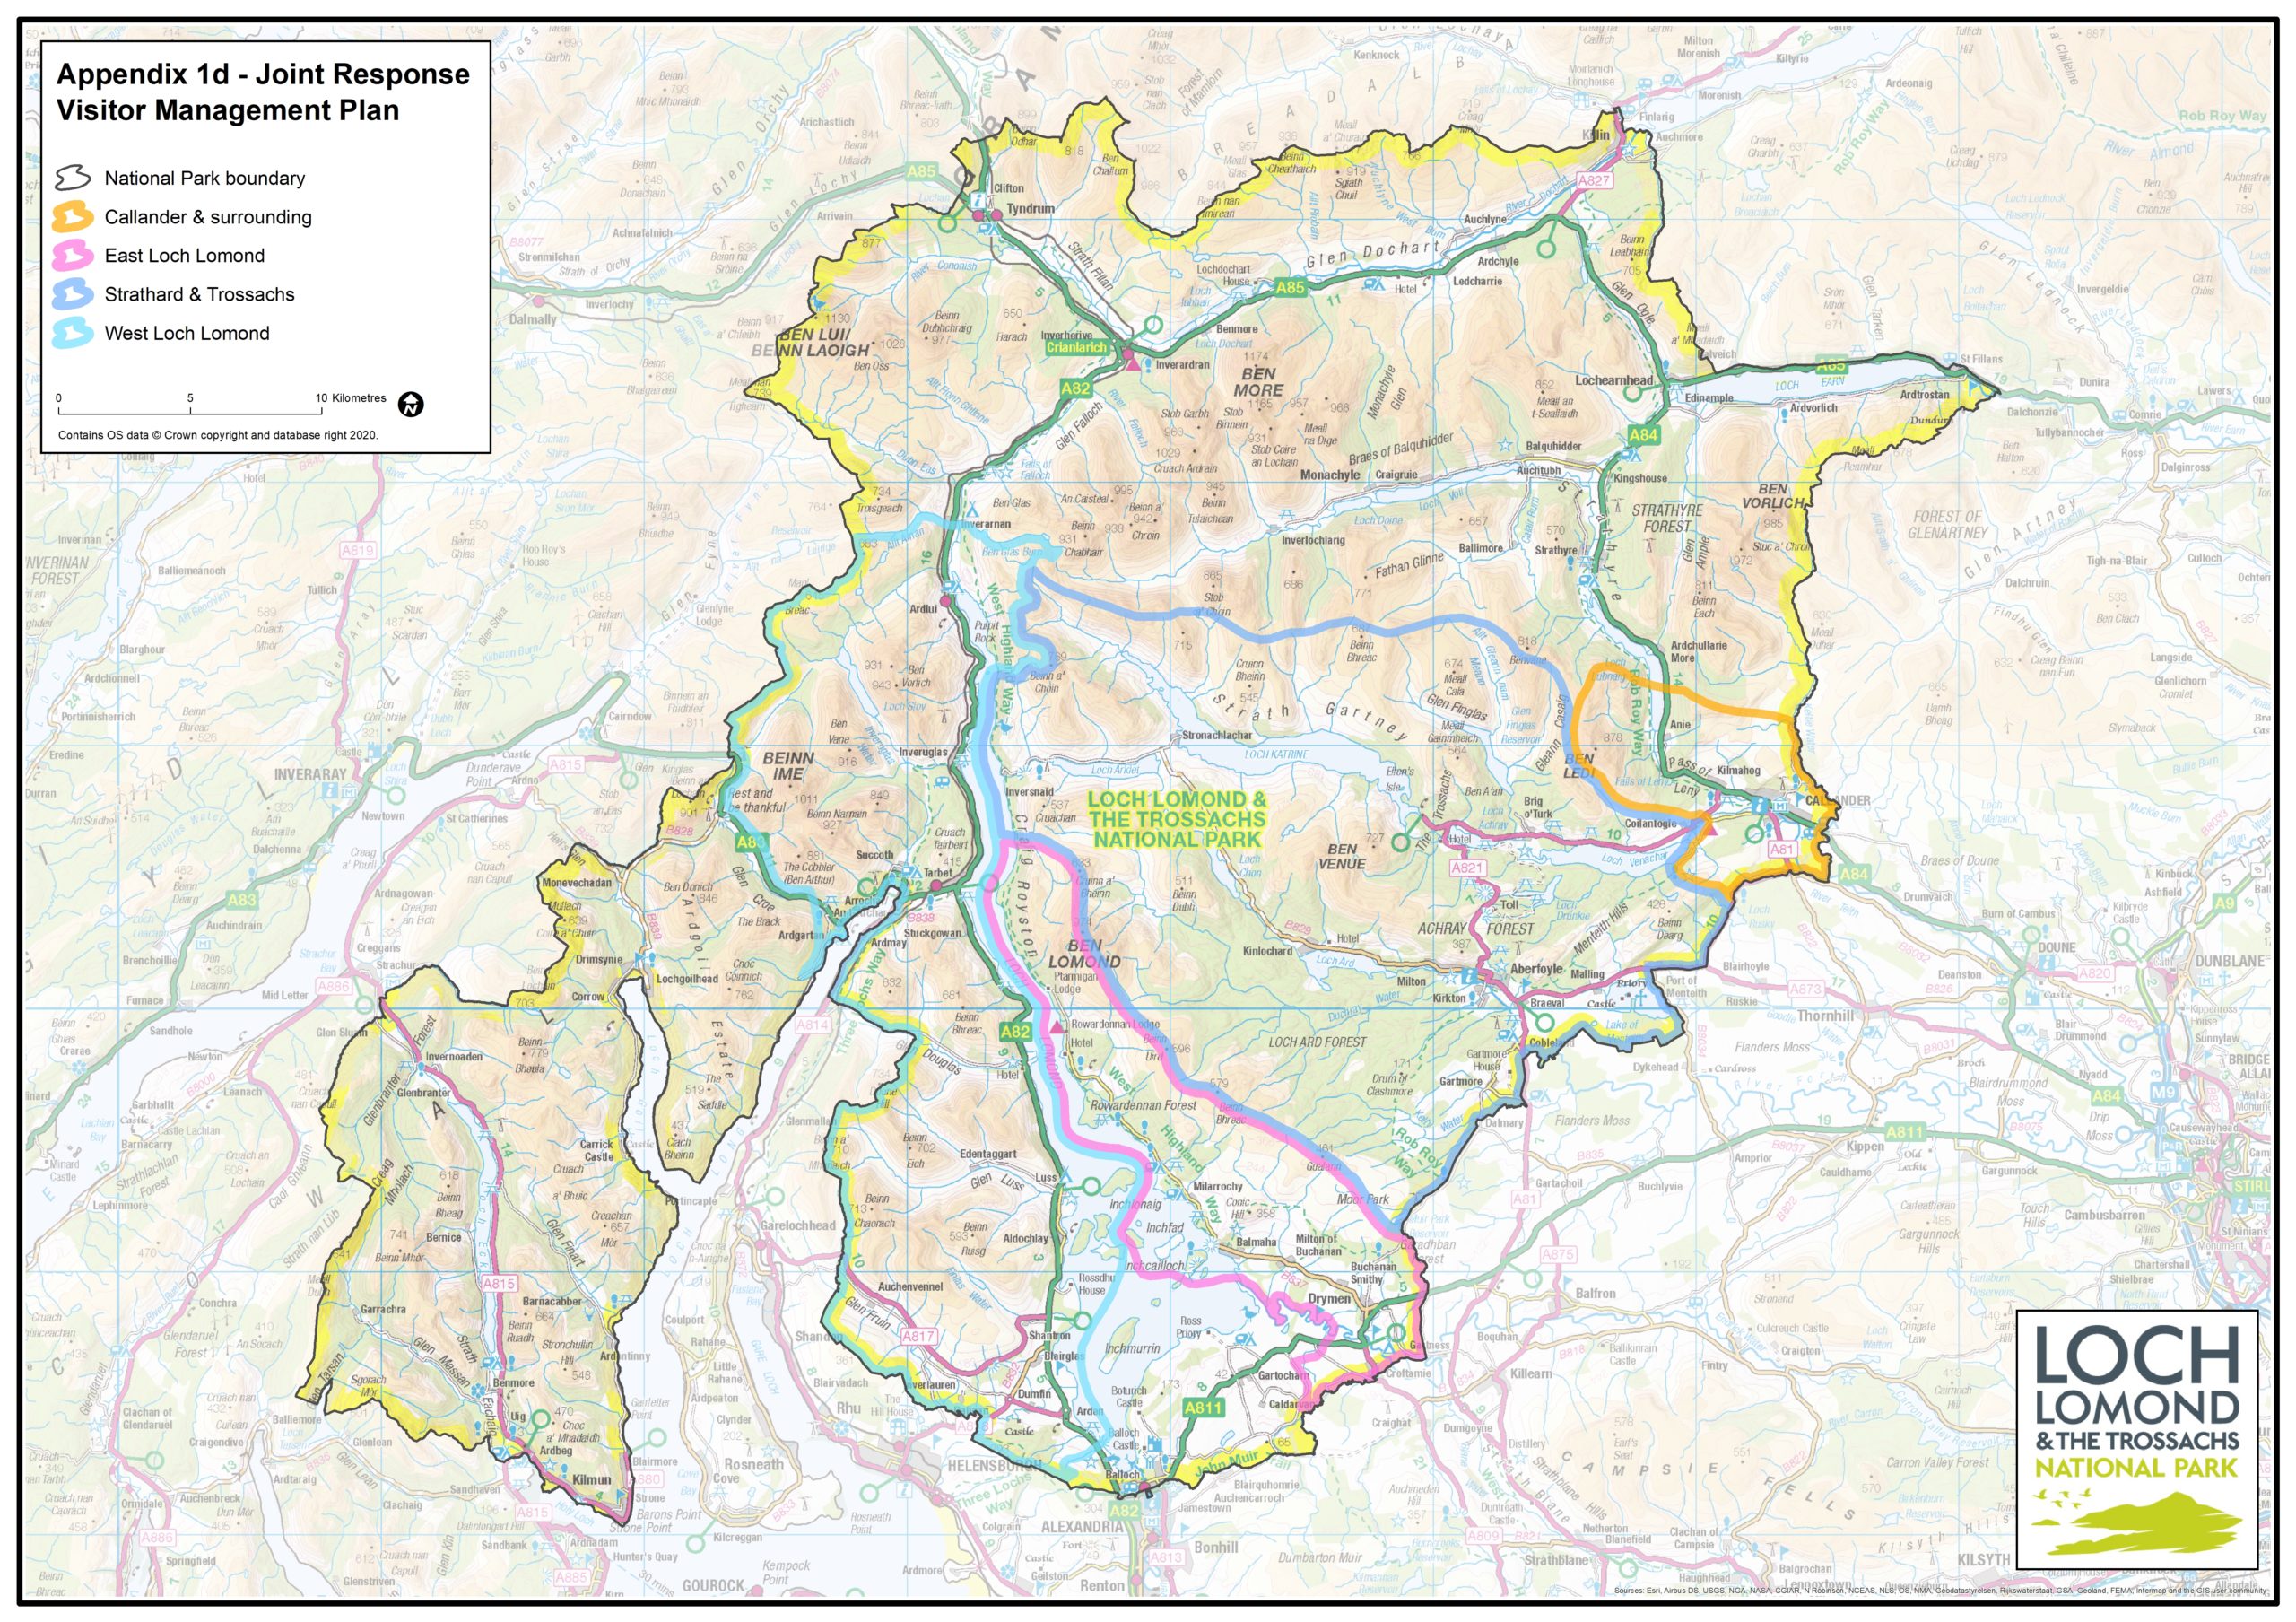 map showing joint response visitor management plan zones within loch lomond and the trossachs national park including callander and the surrounding area, east loch lomond, strathard and the trossachs and west loch lomond